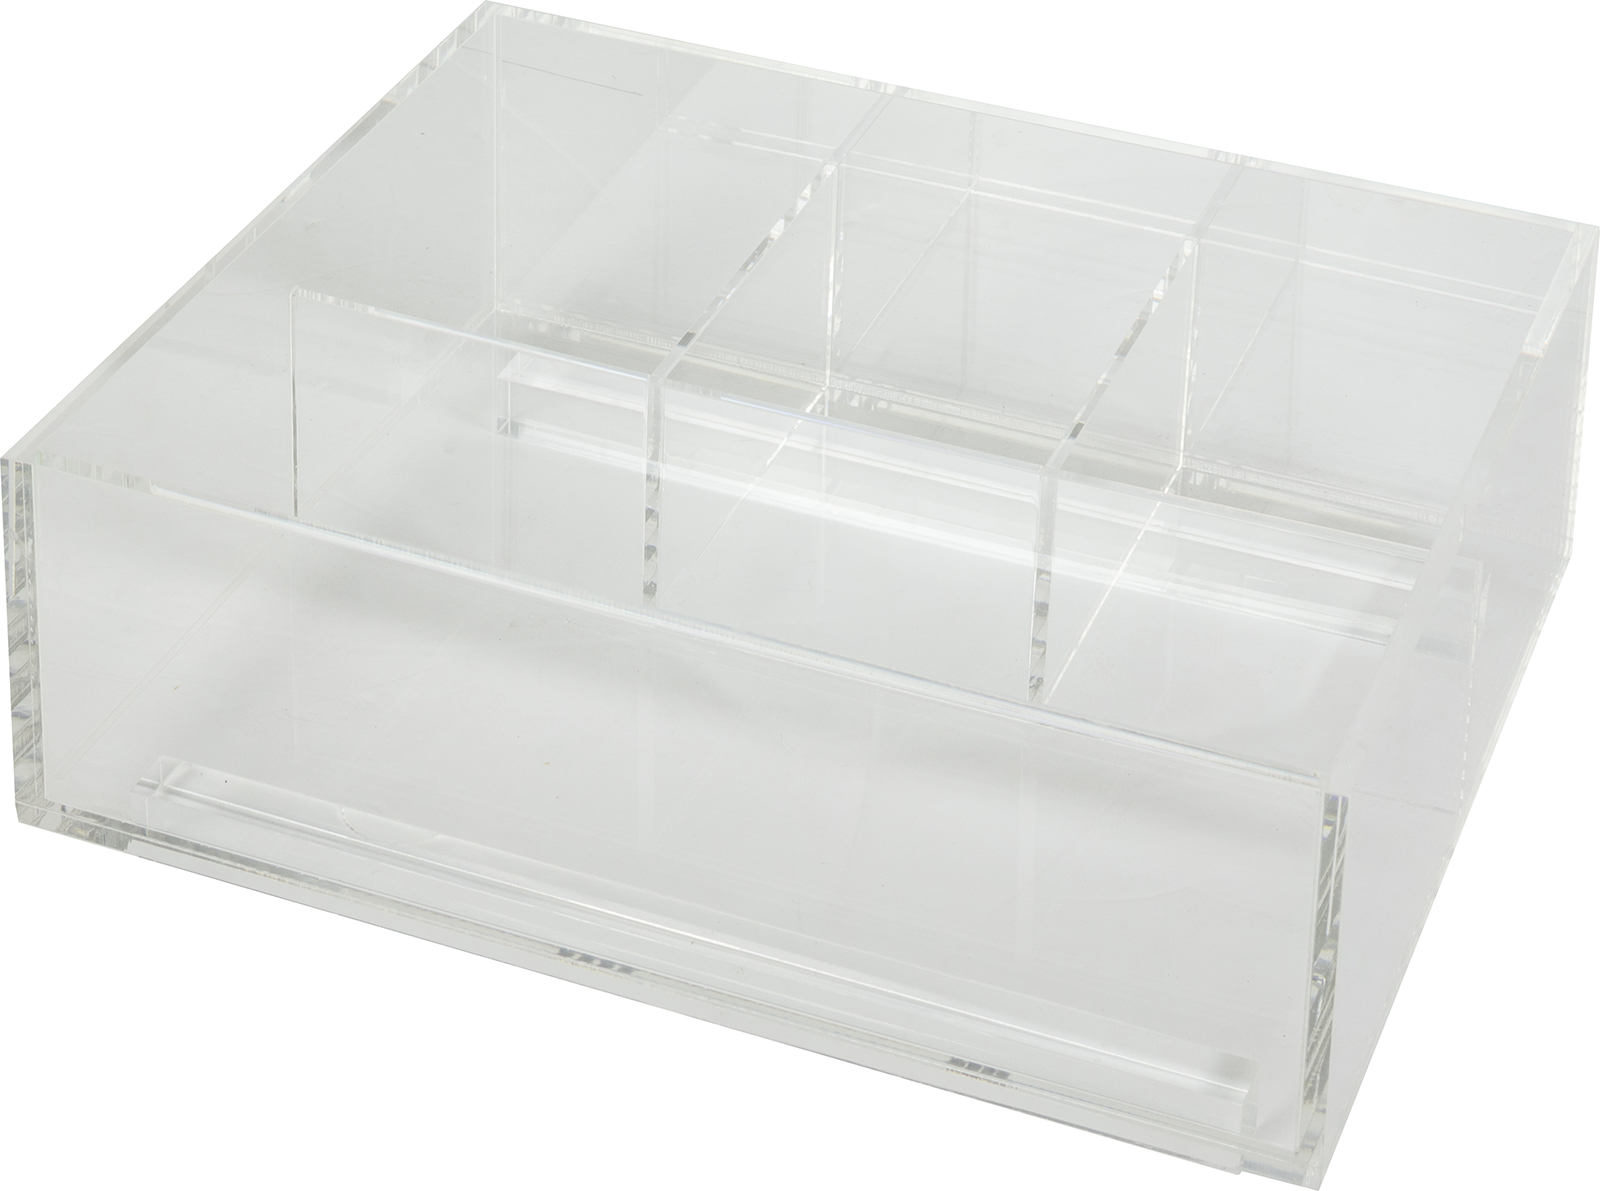 12 Lazy Suzan Aluminum Foil Tray with Compartments and Raised